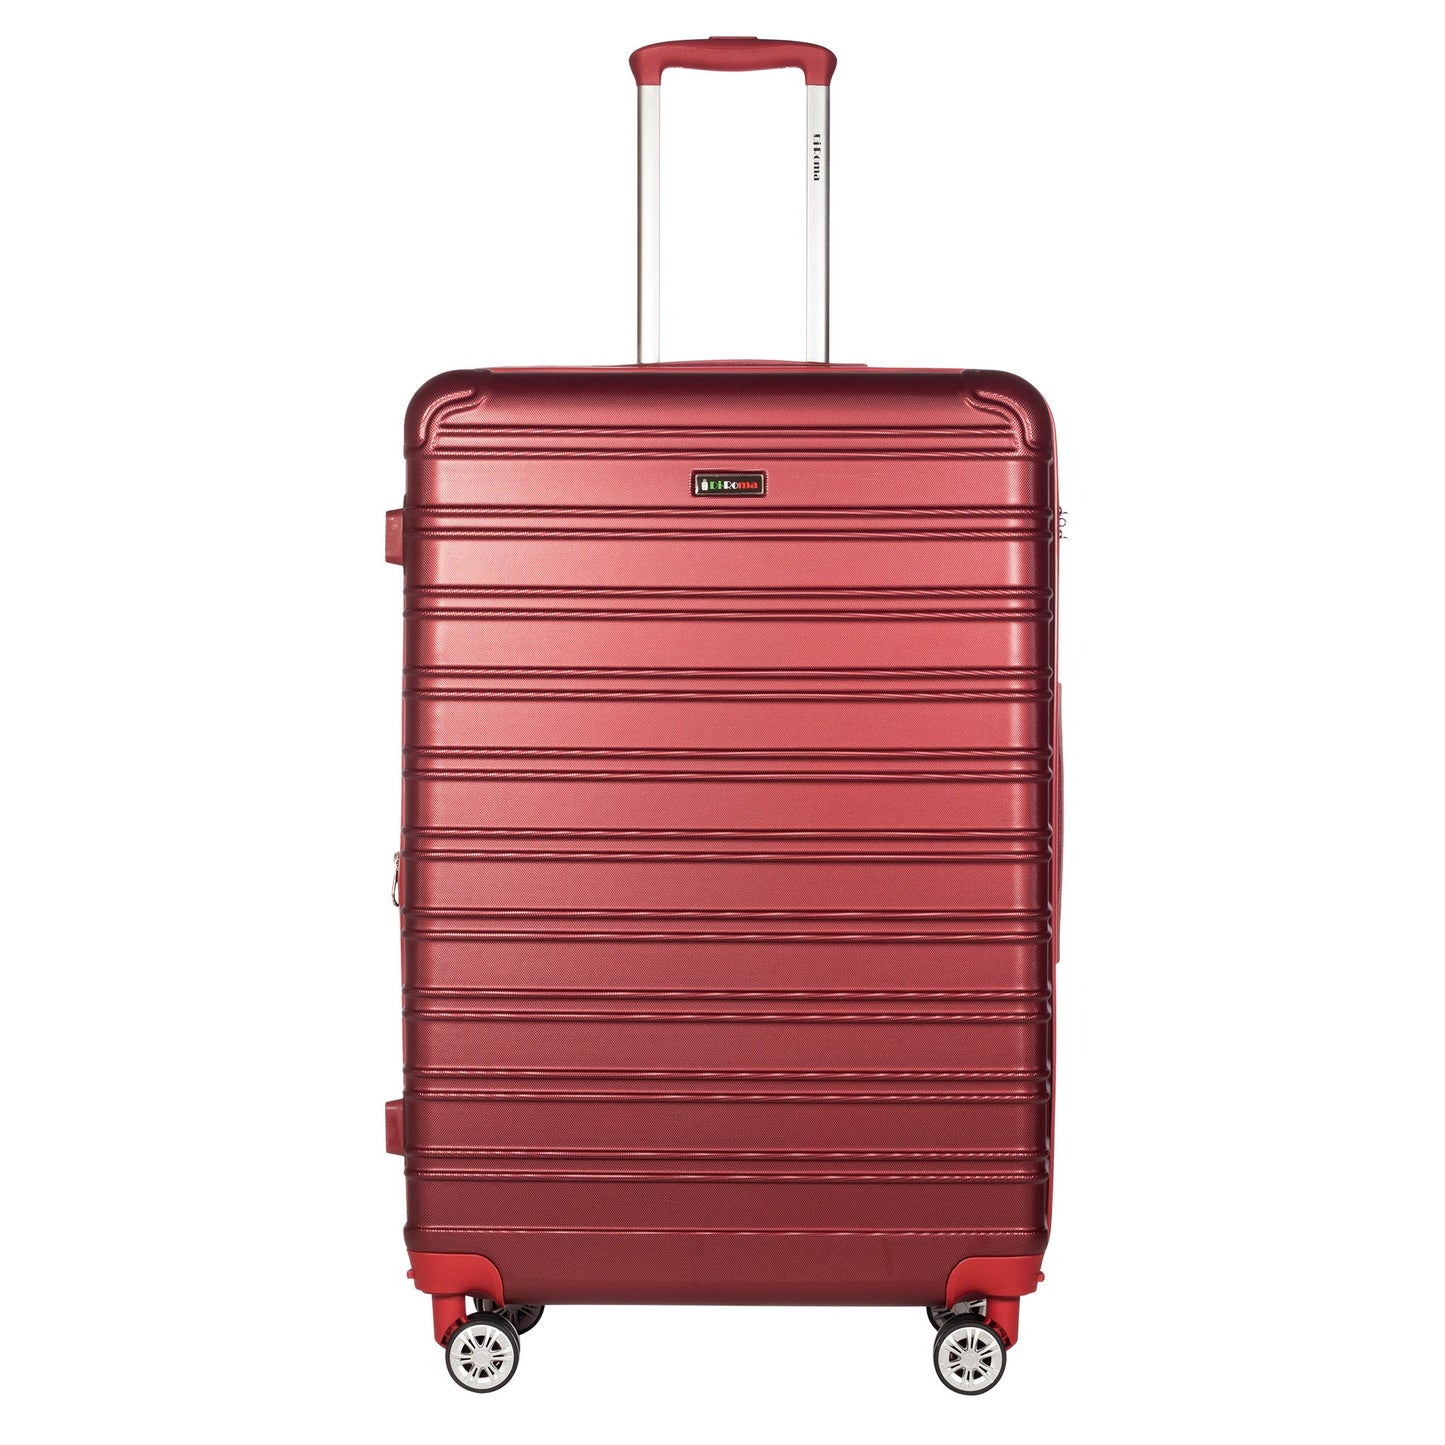 King Collection Red luggage (20/26/28/30") Suitcase Lock Spinner Hard